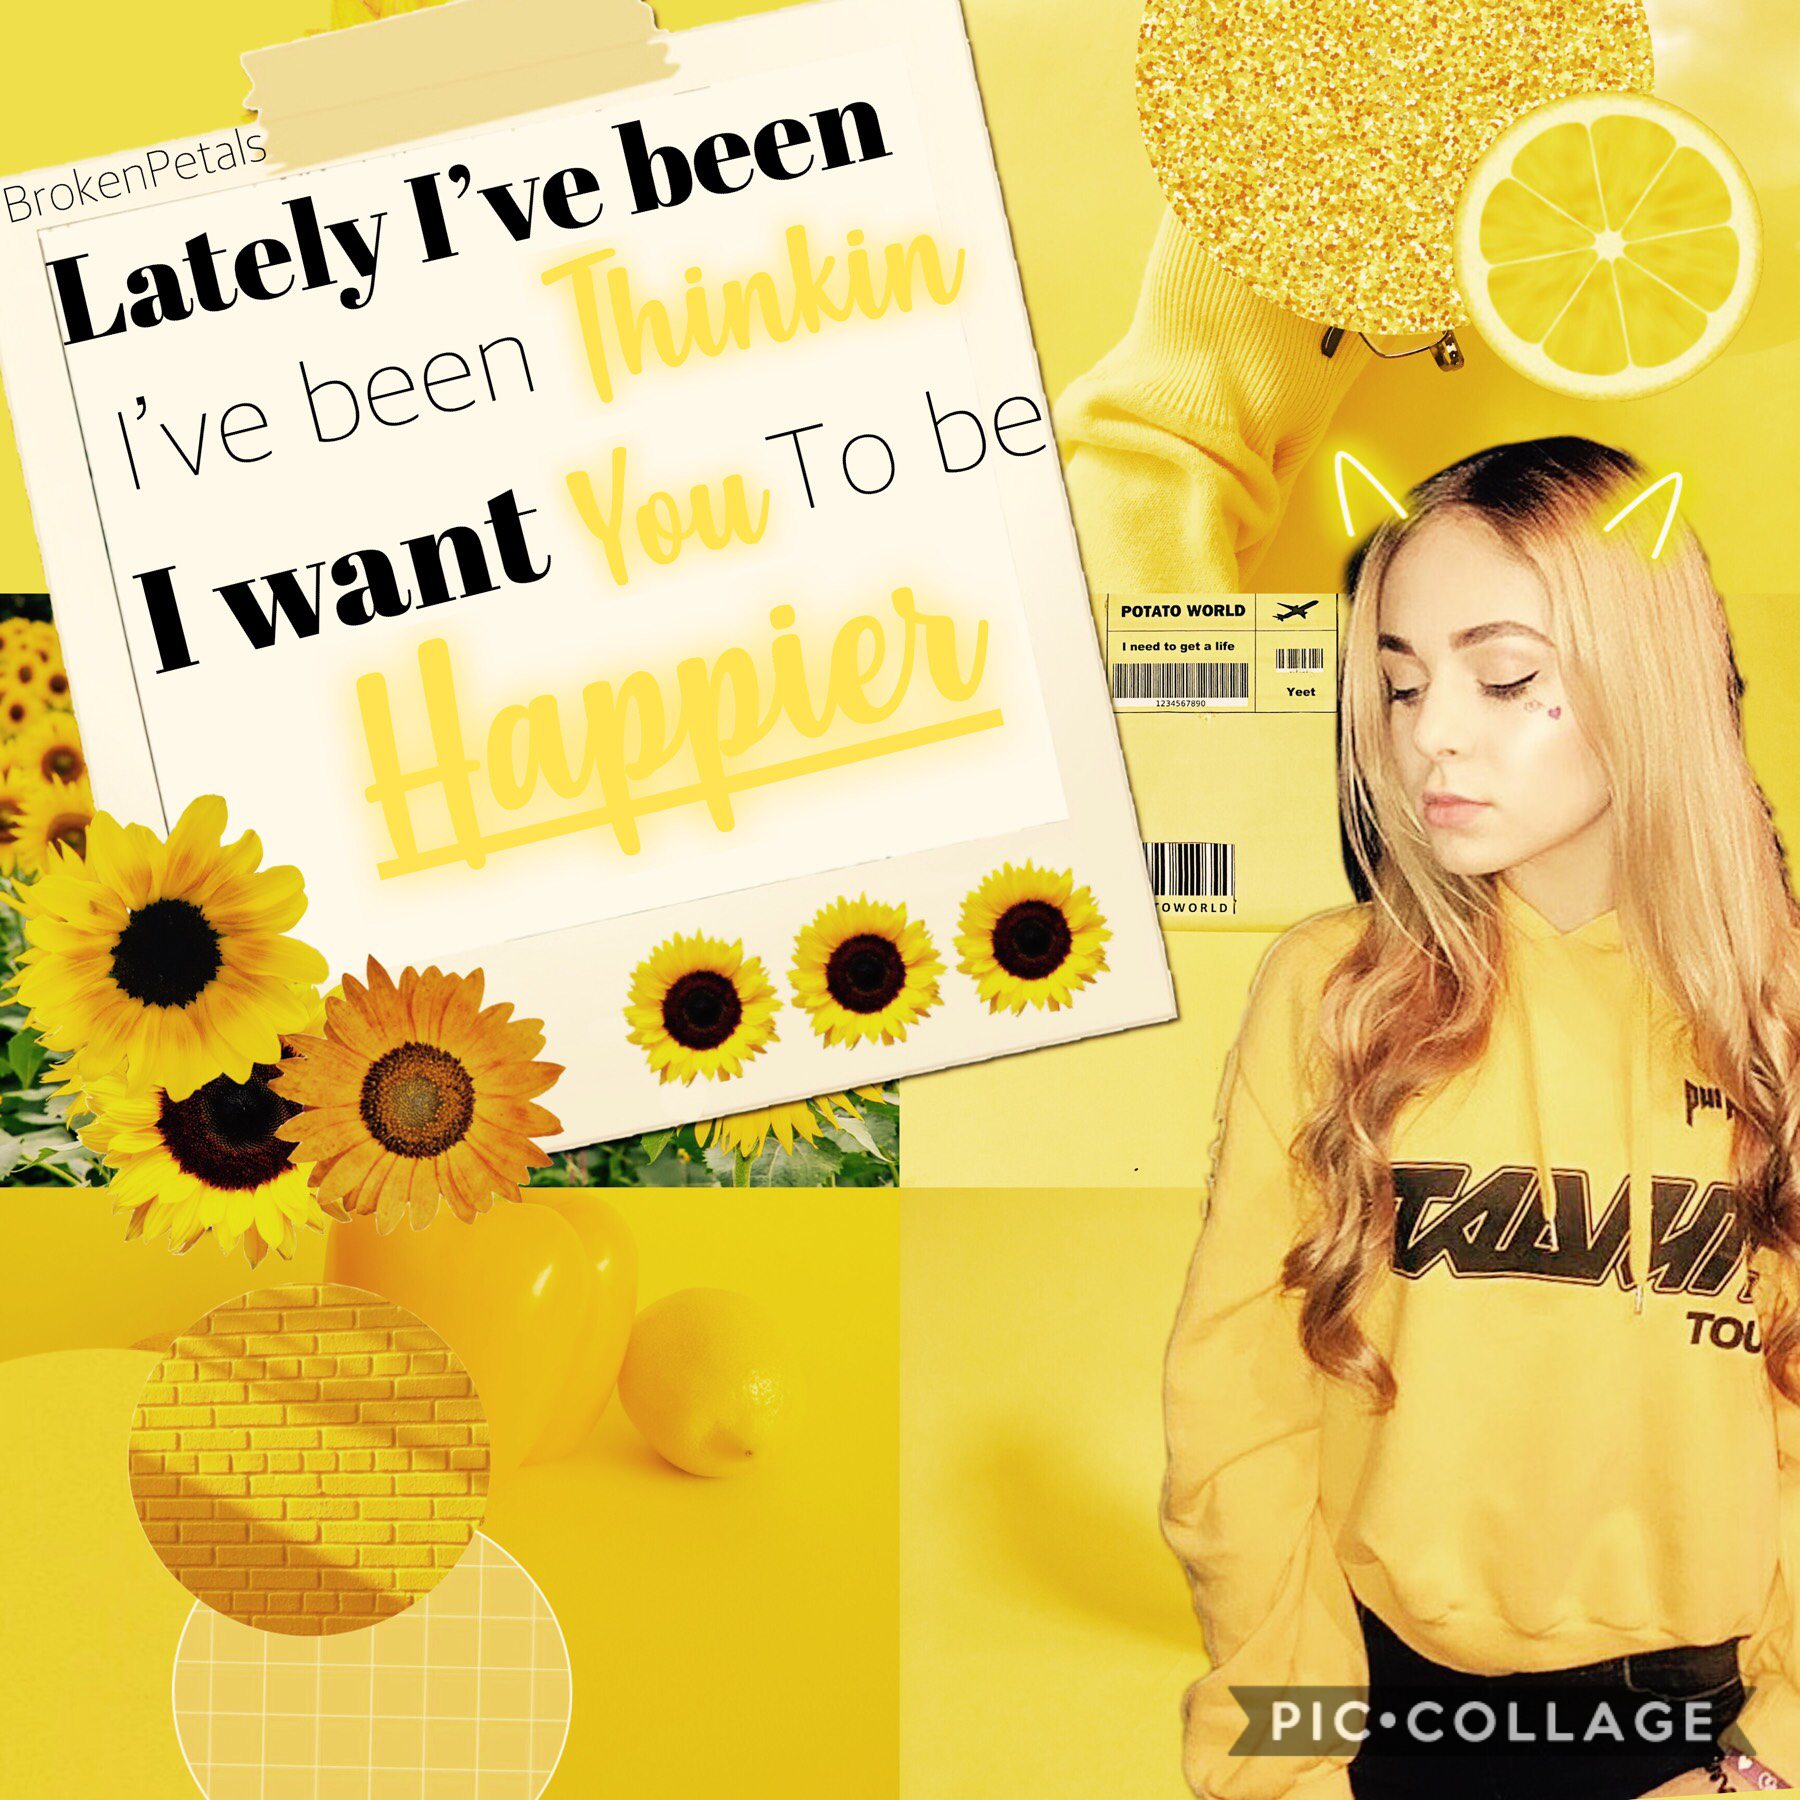 First edit! Tap

Hi everyone! This is my first edit on this account. I hope you like it.
Qotd: favorite color?
Aotd: yellow 
Can you guess my main?